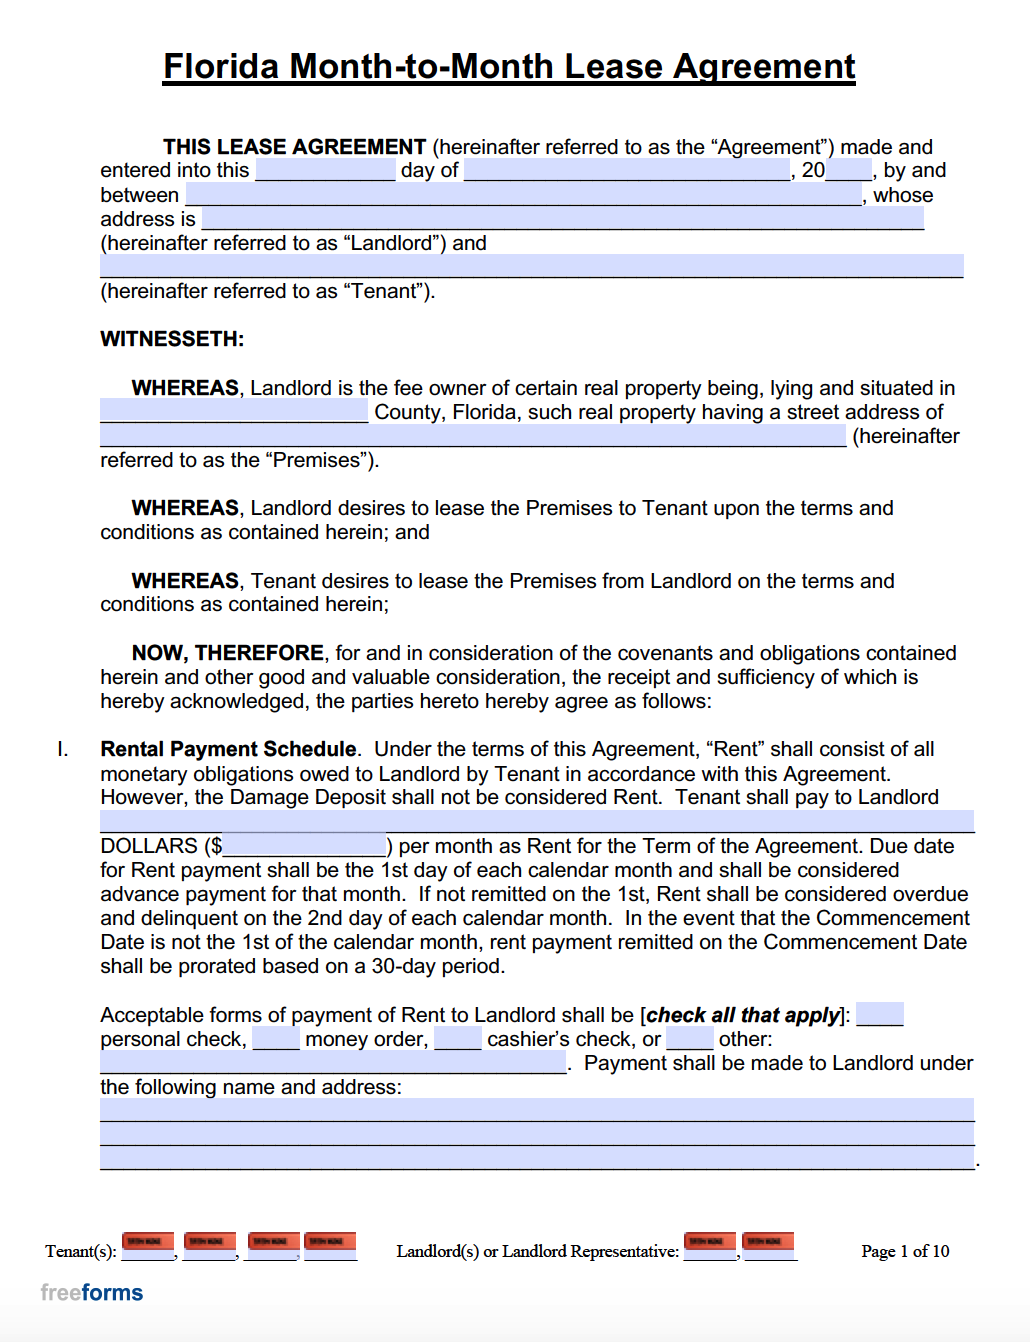 florida-residential-lease-agreement-or-month-to-month-rental-agreement-pdf-by-demianak-bond